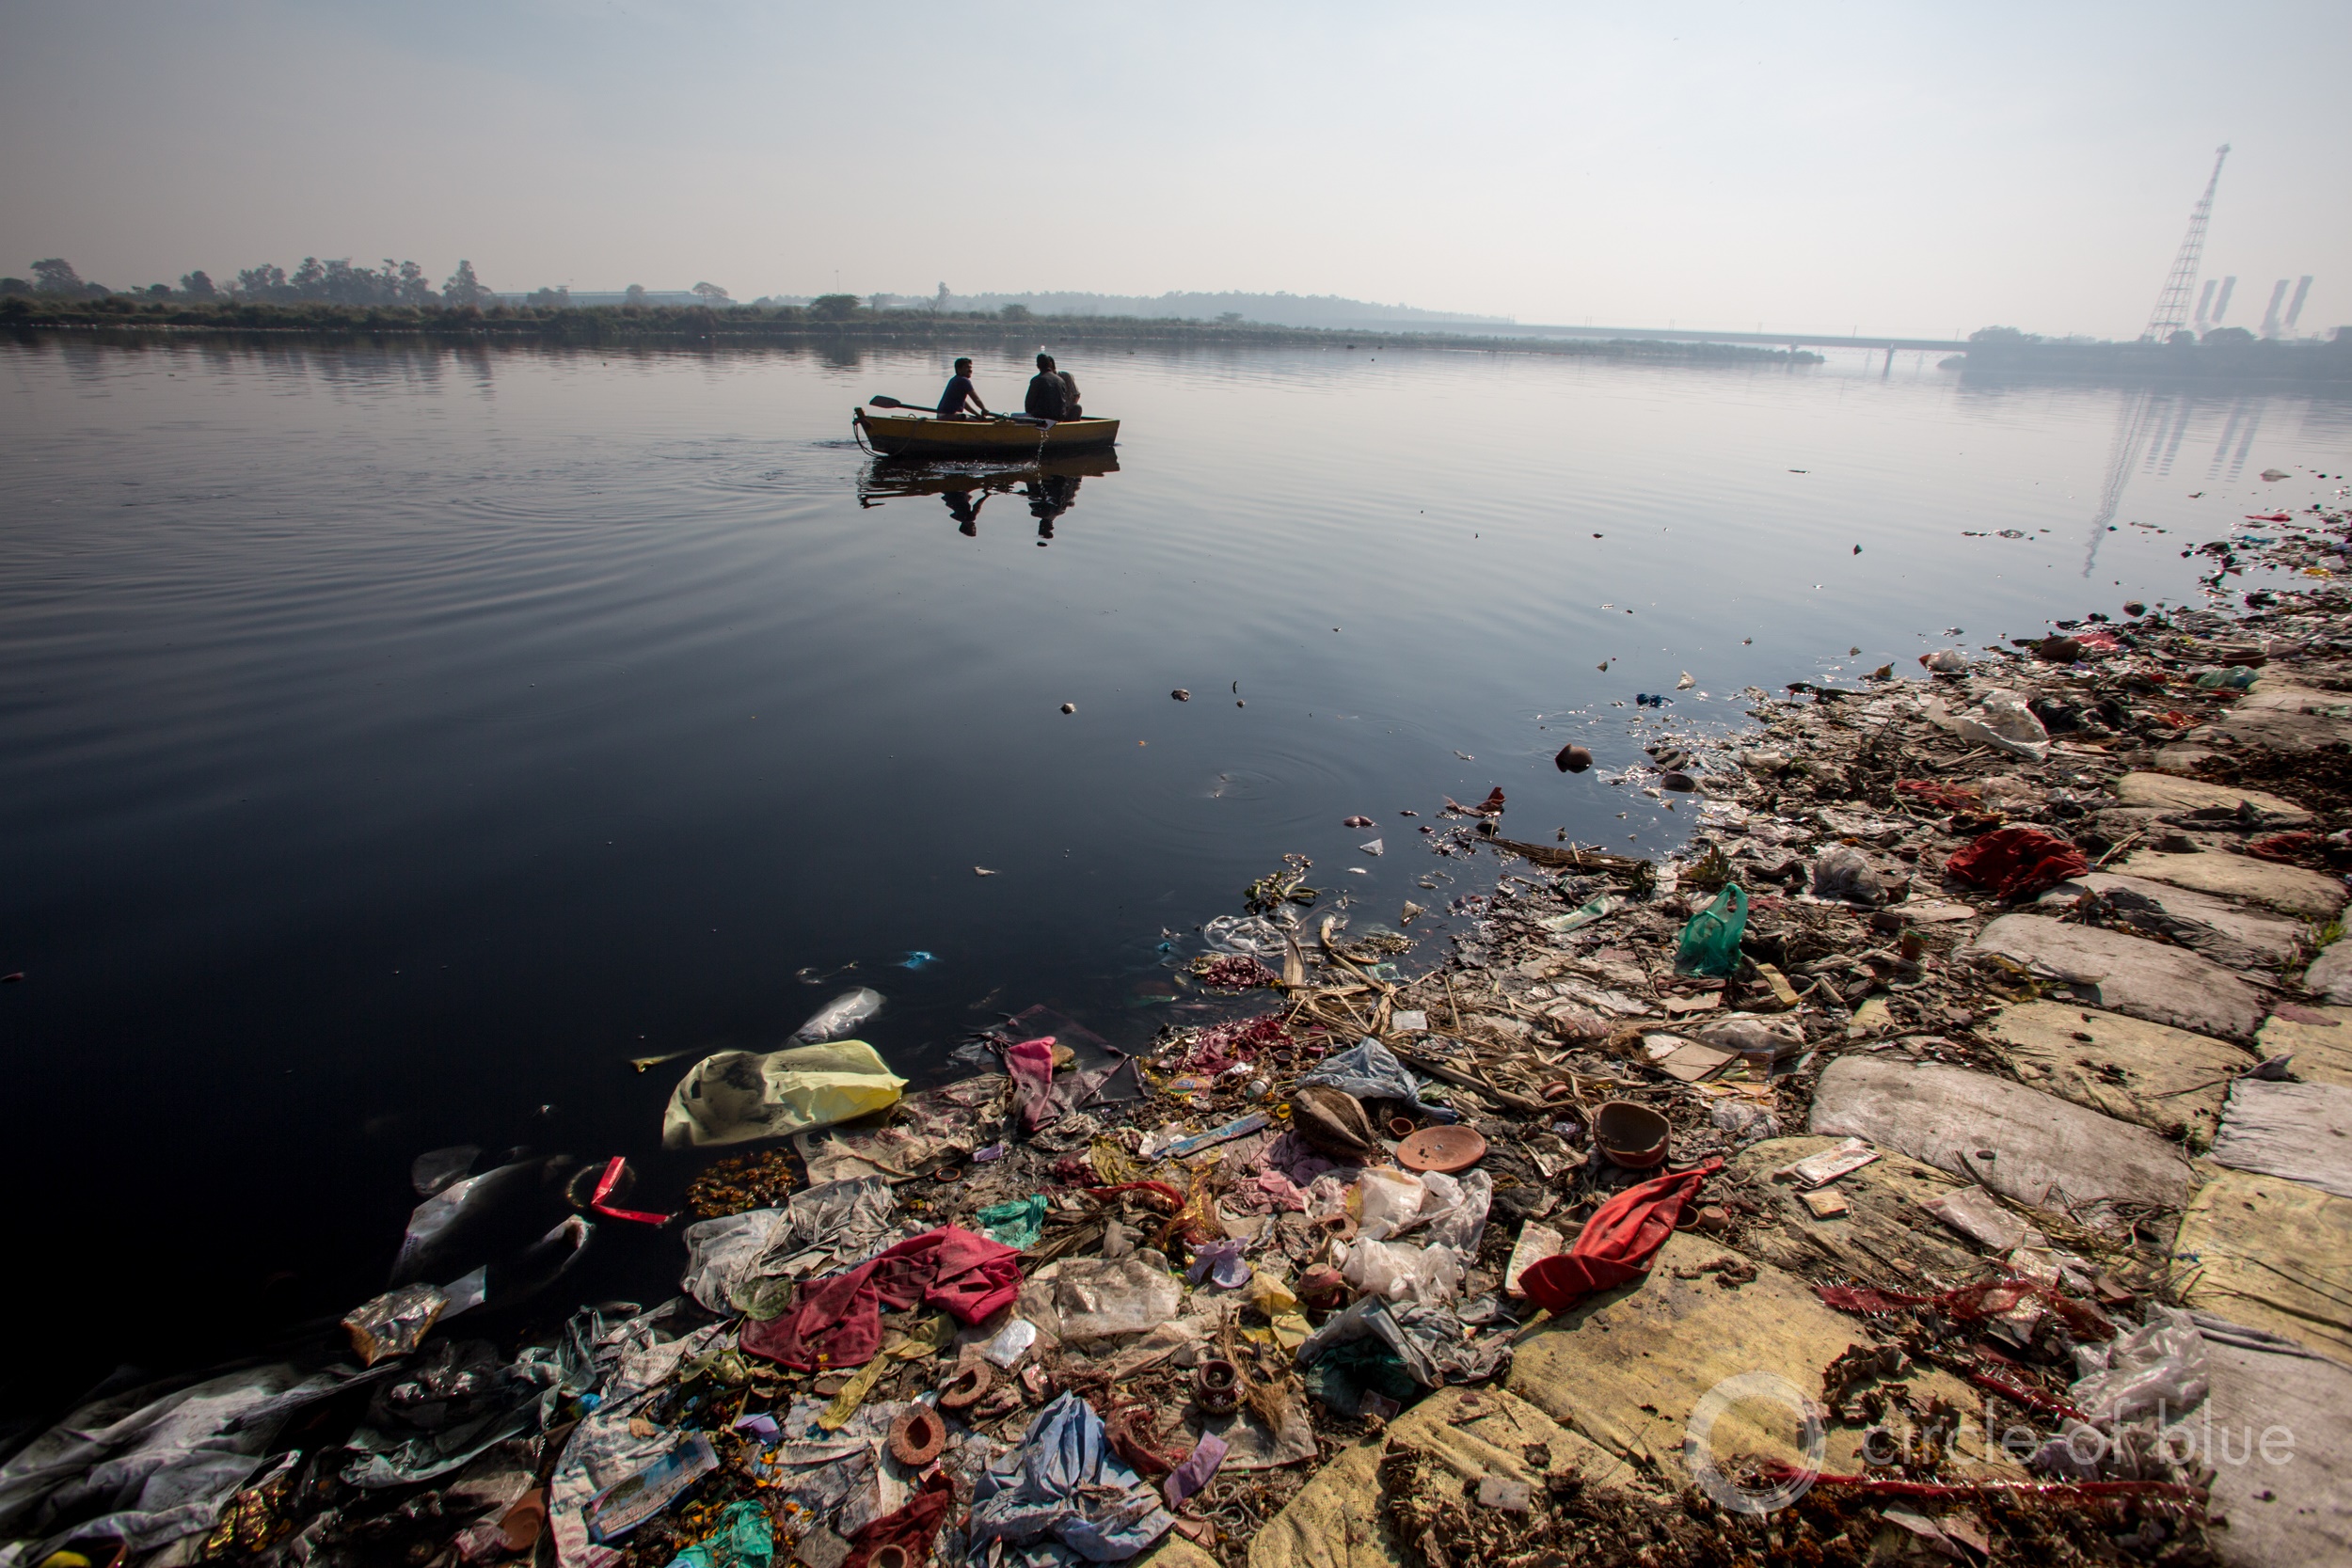 The Yamuna River flows through Delhi, the capital of India. The world's second most populous country faces severe water and climate challenges. Photo © J. Carl Ganter / Circle of Blue